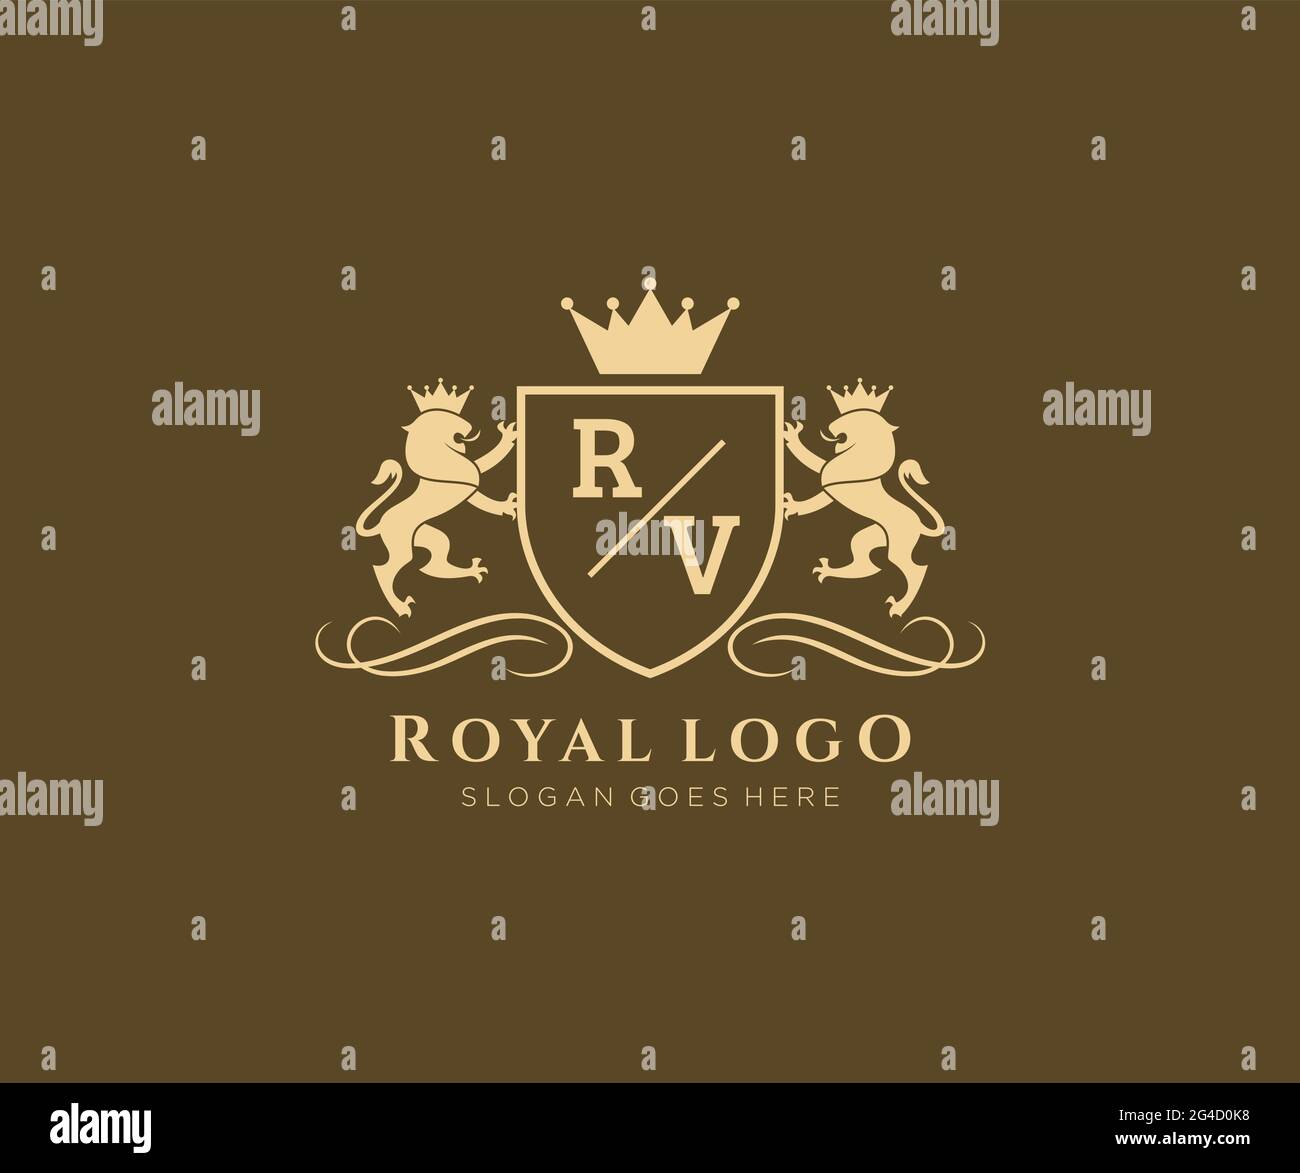 RV Letter Lion Royal Luxury Heraldic,Crest Logo template in vector art for Restaurant, Royalty, Boutique, Cafe, Hotel, Heraldic, Jewelry, Fashion and Stock Vector